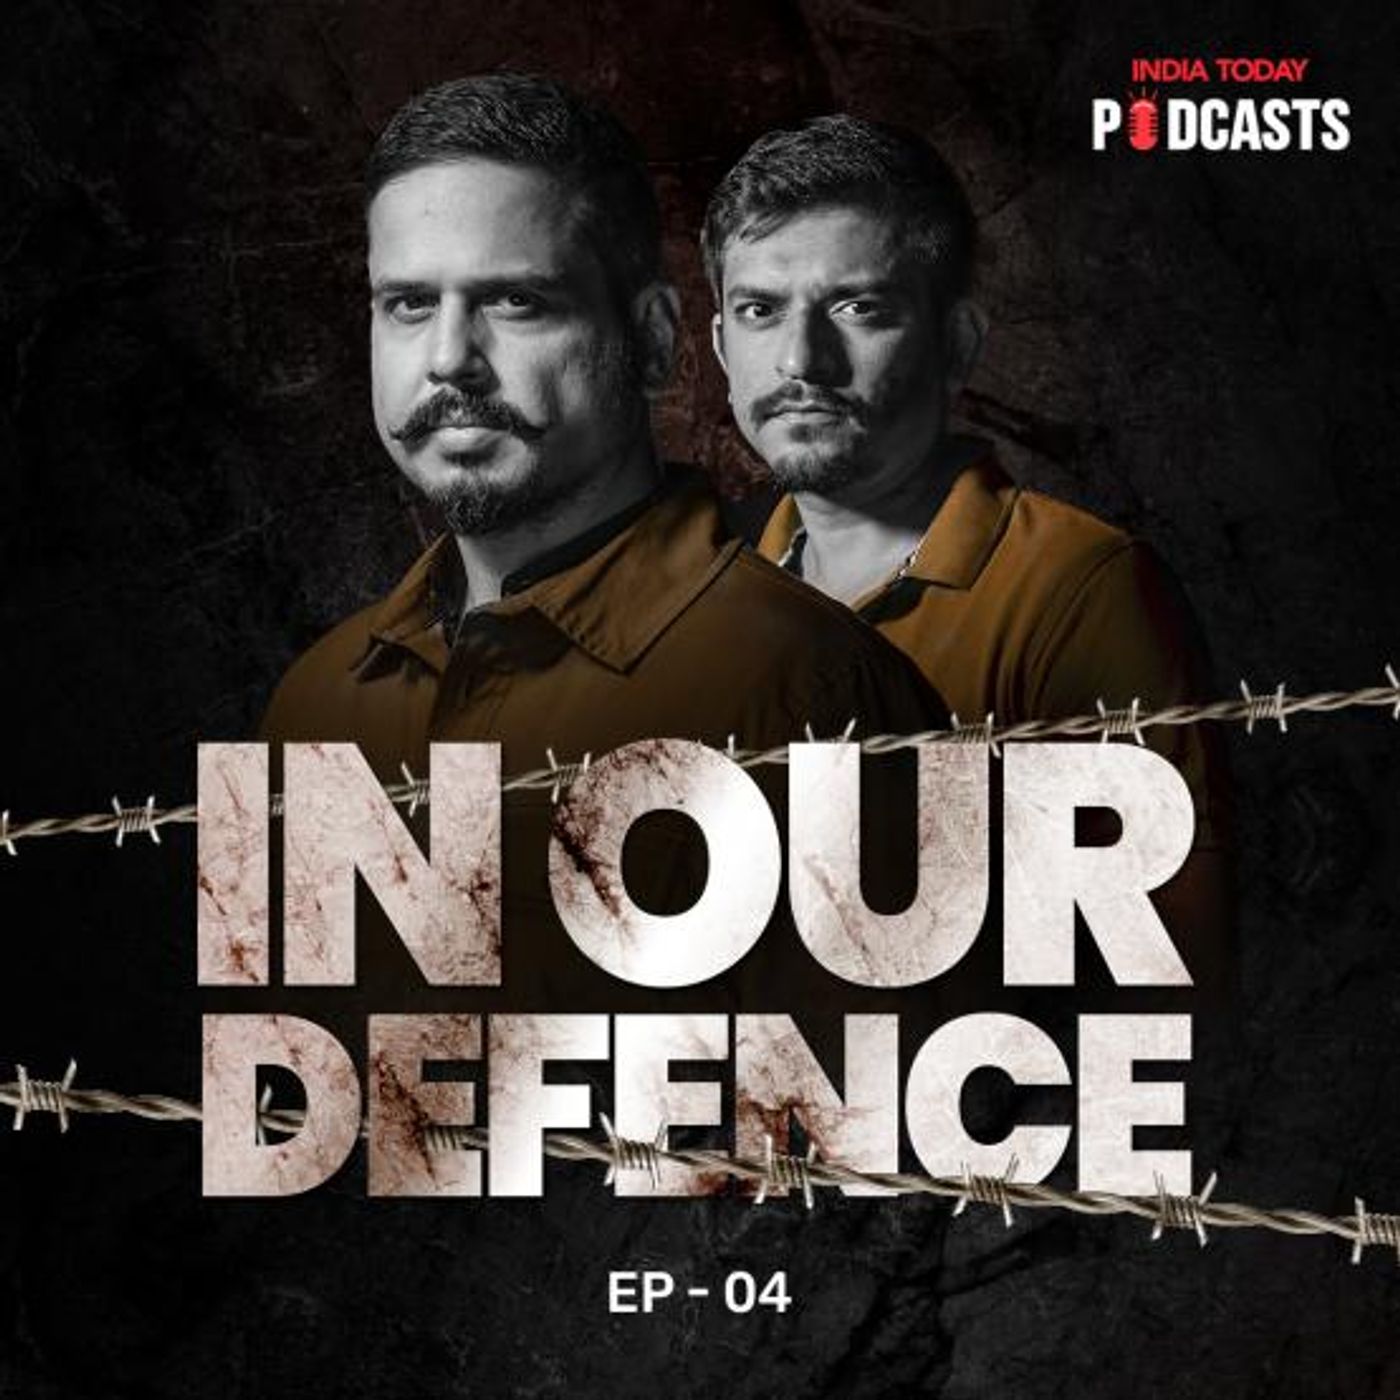 Decoding The Poonch-Rajouri Mess In Kashmir | In Our Defence S2, Ep 04